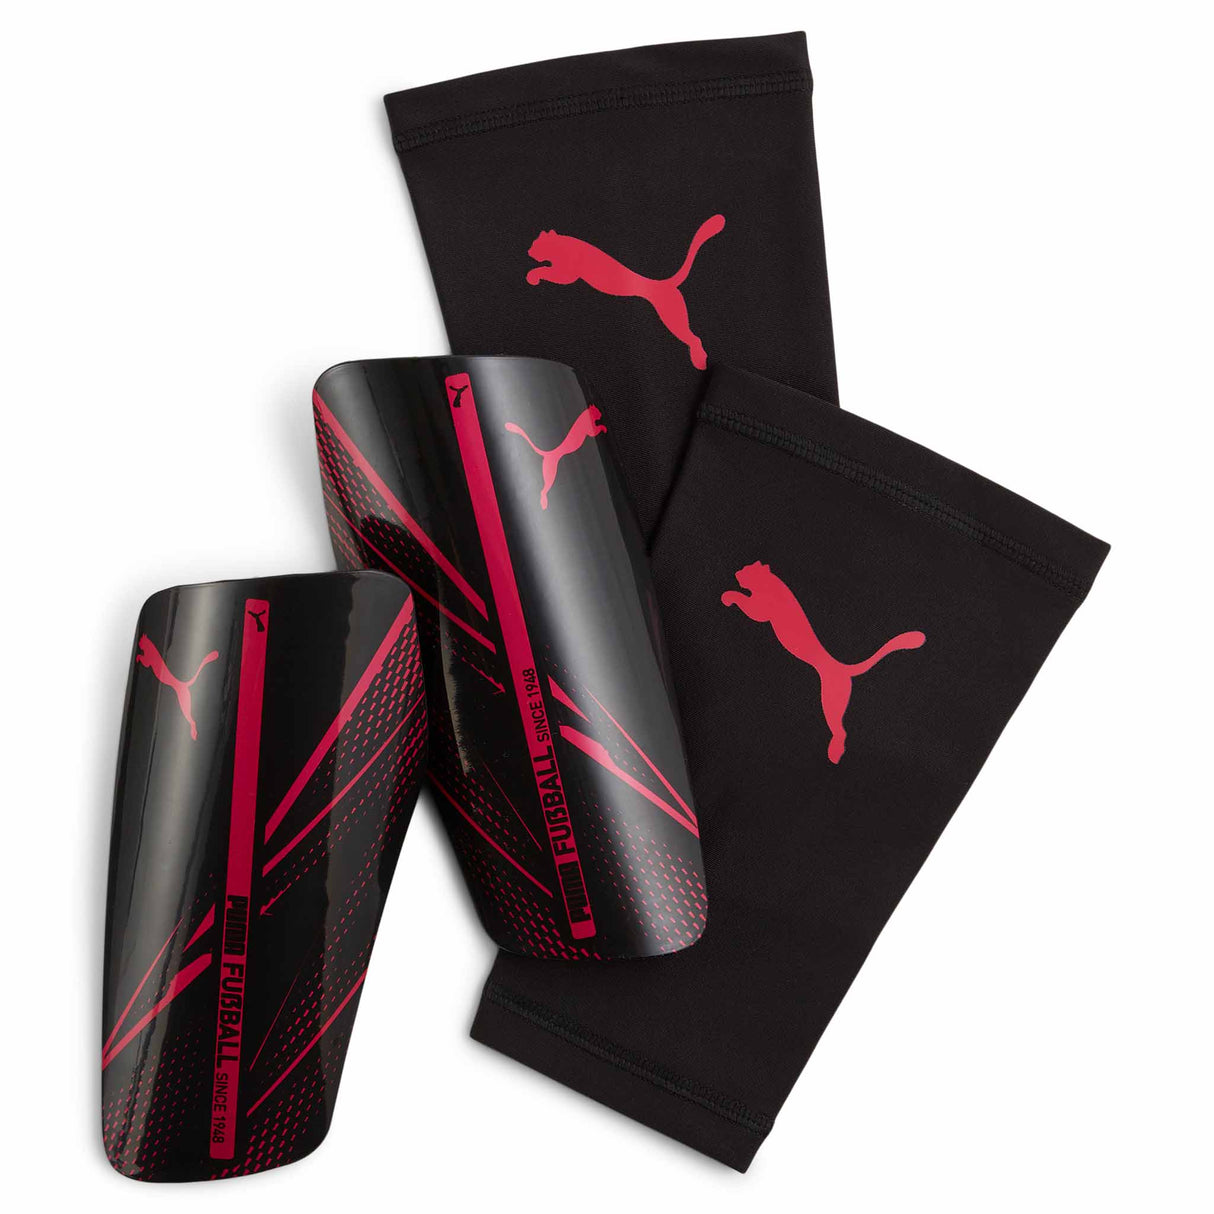 Puma Attacanto Bundle: Soccer cleats, ball and shinguards for kids